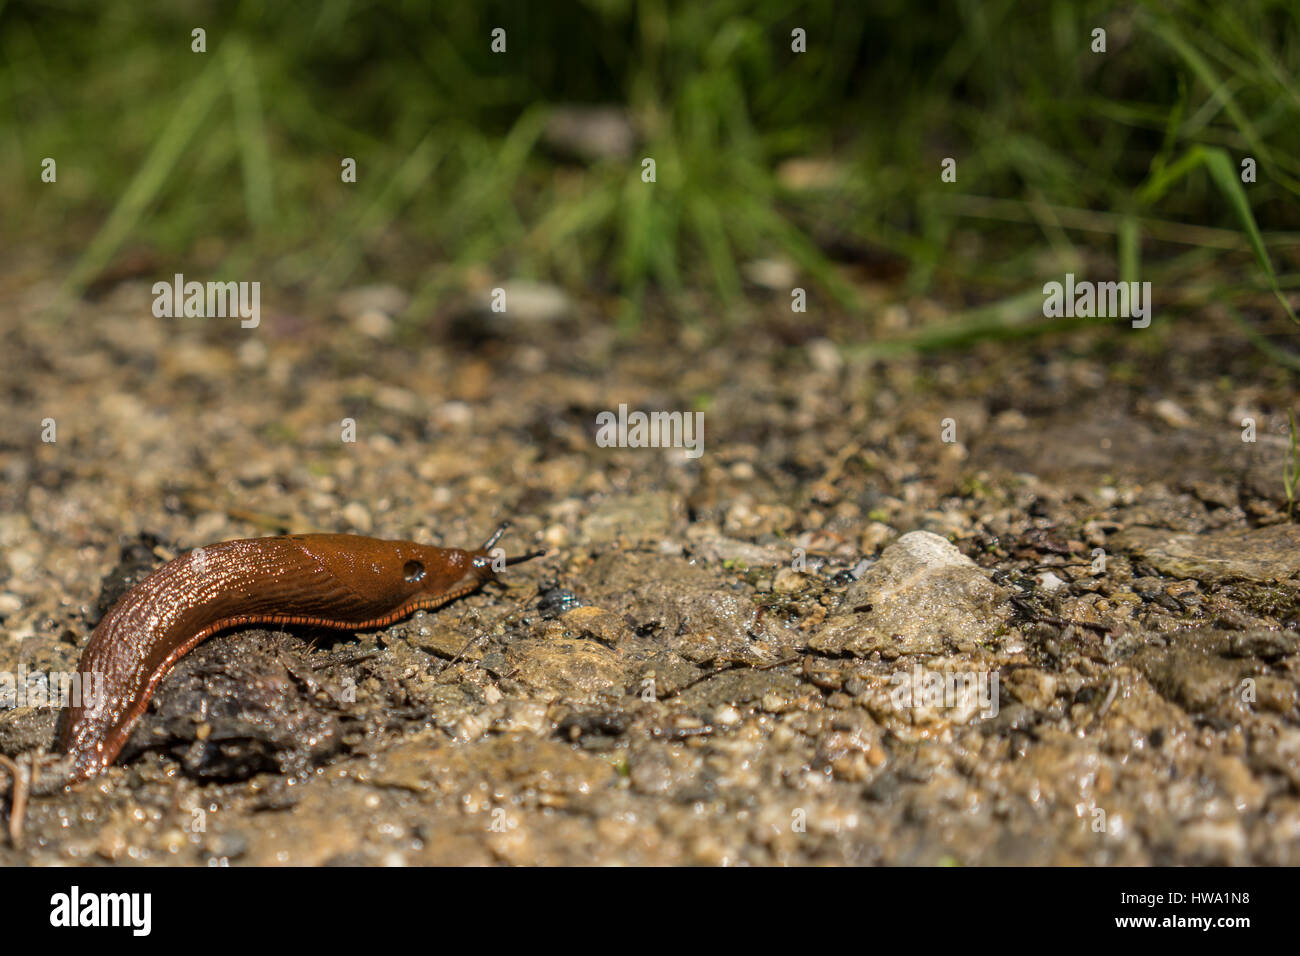 A slug (gastropod) belonging to the phylum Mollusca in the wild. Stock Photo